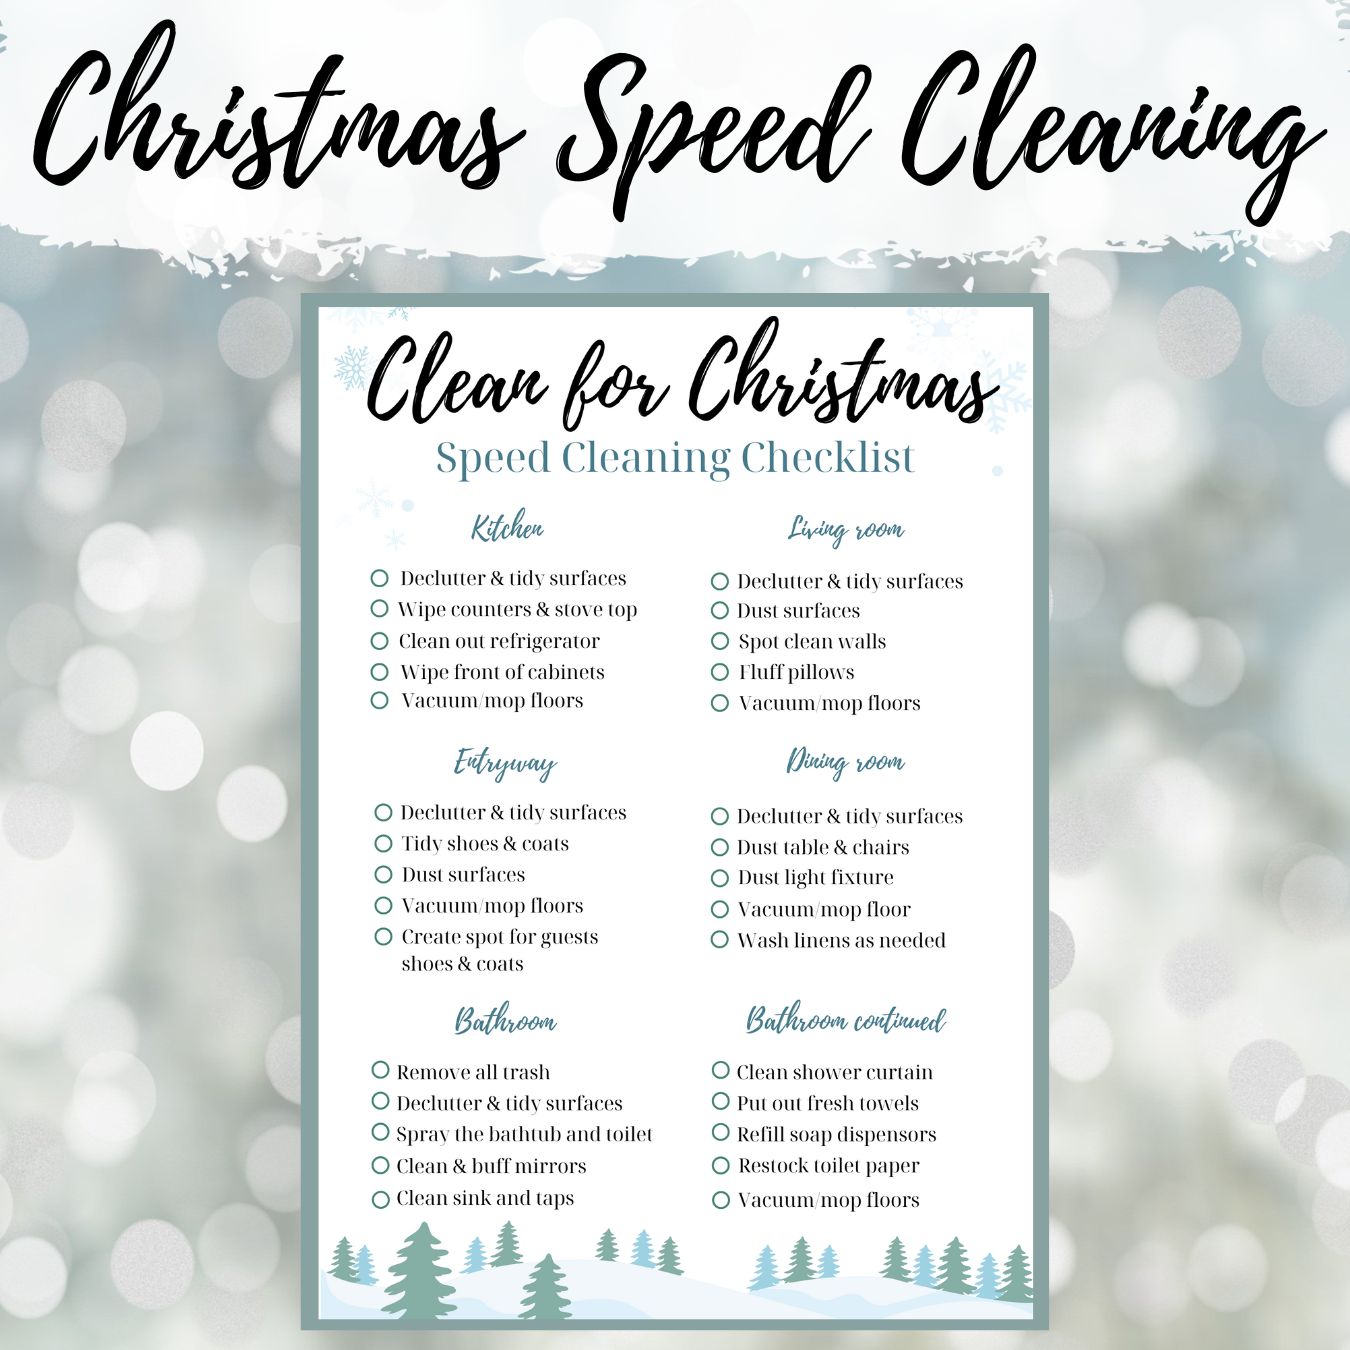 Christmas Speed Cleaning Checklist - Clutterbug